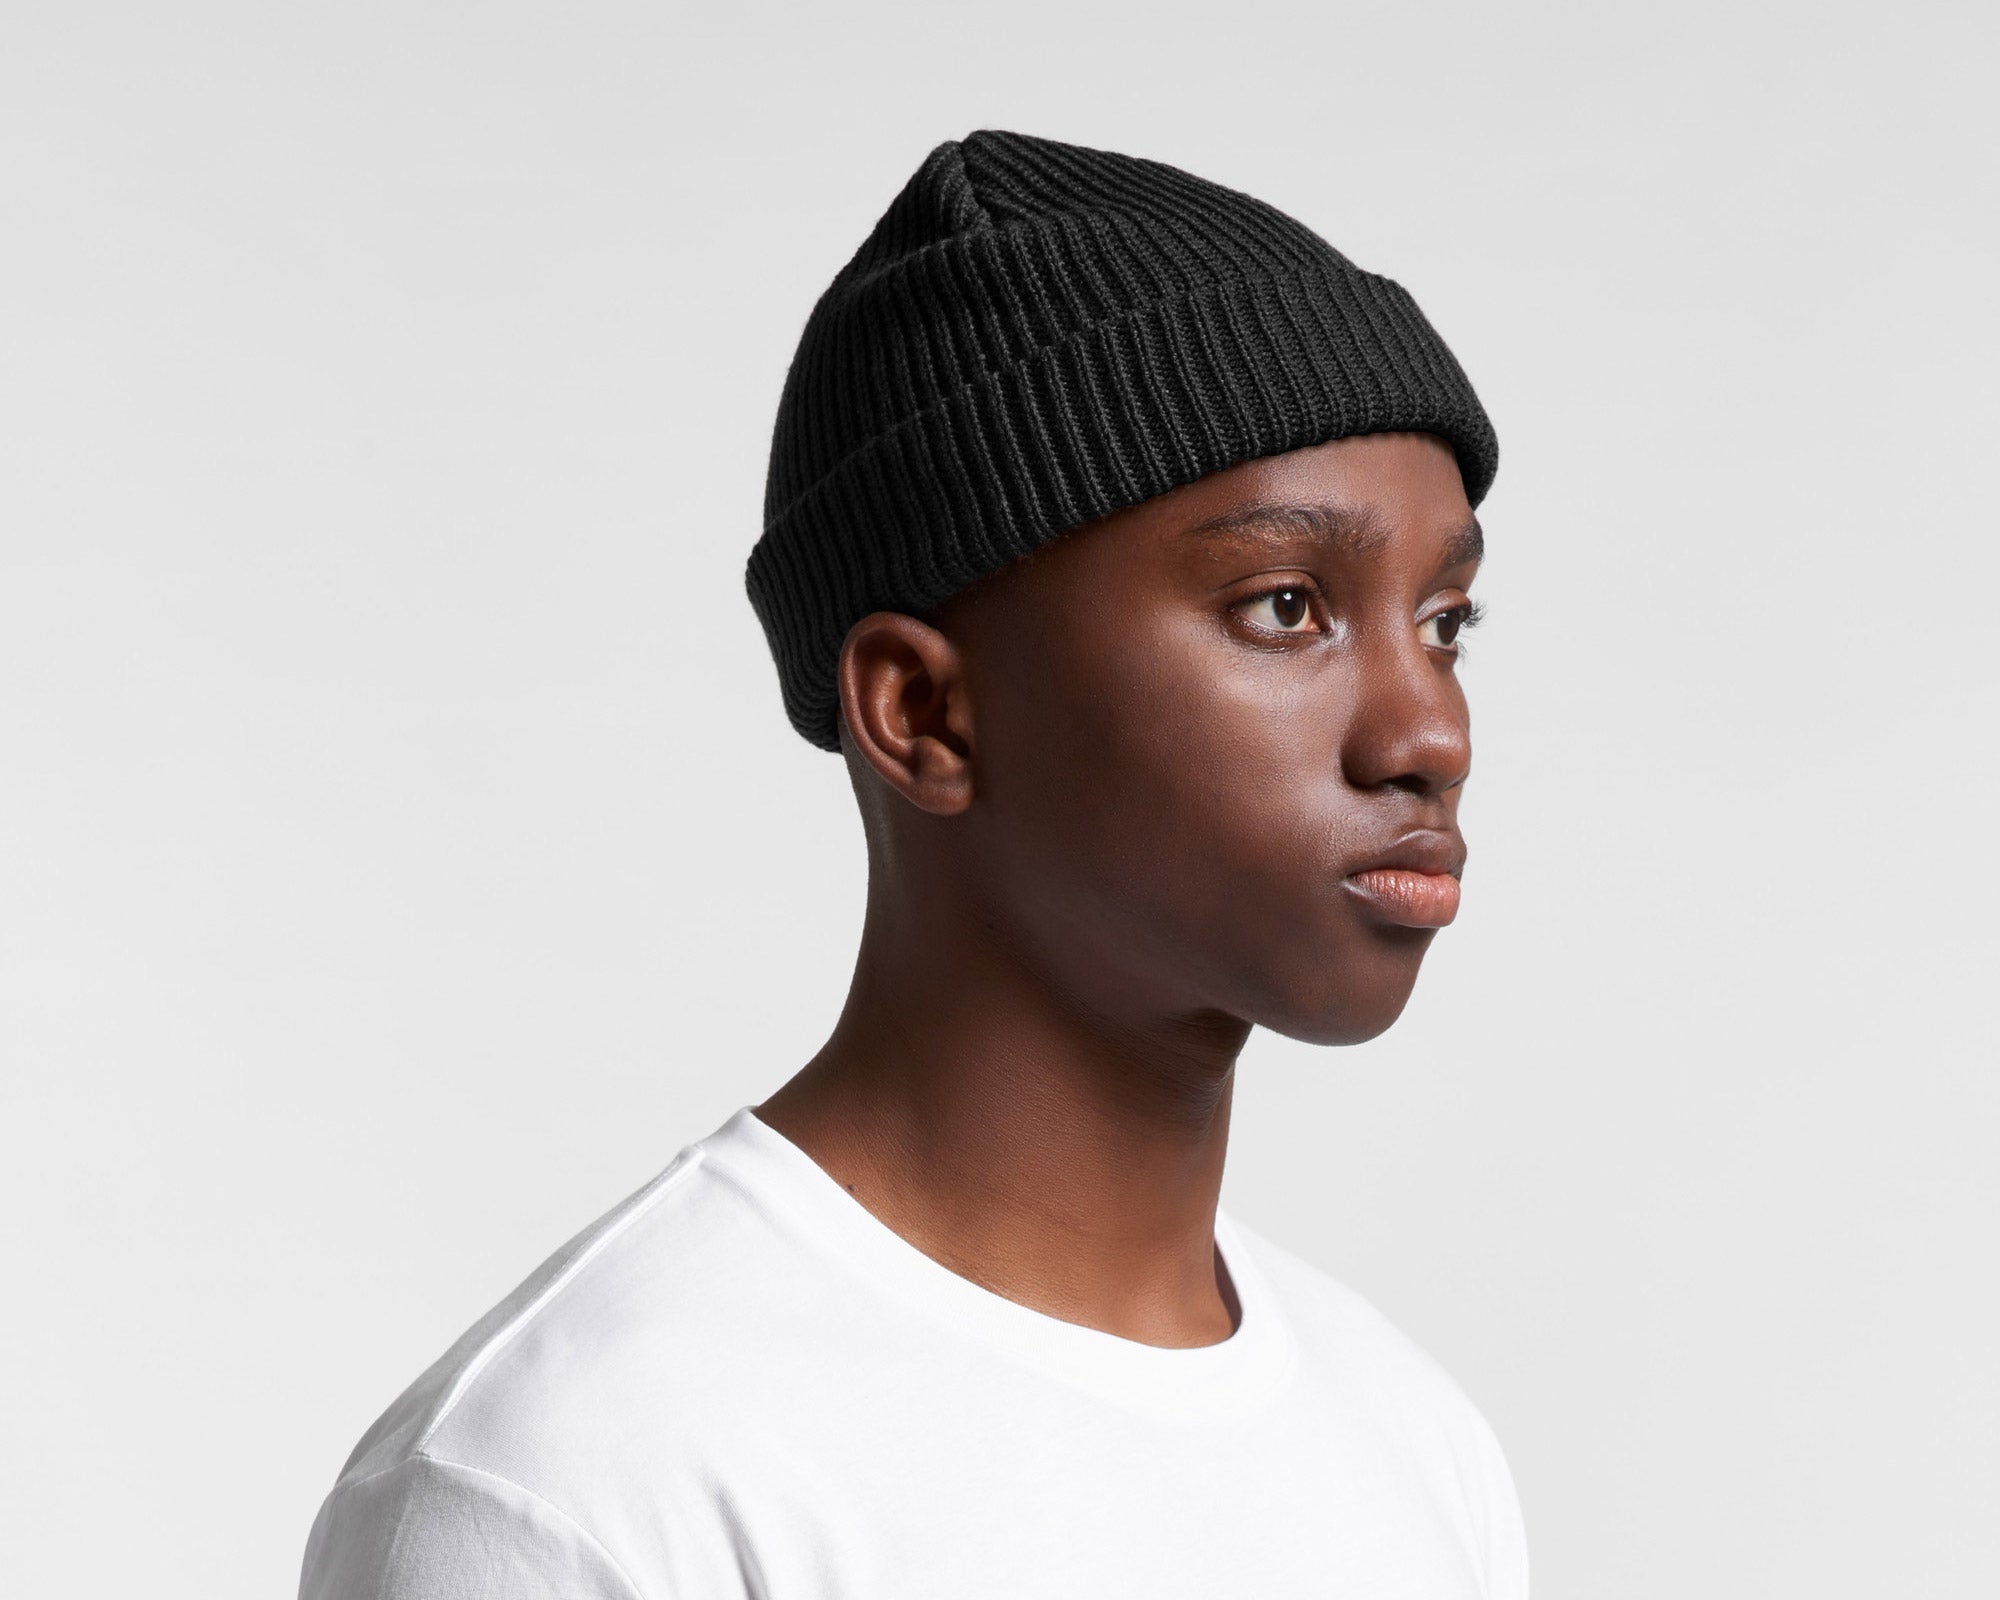 Fisherman’s Beanie with Pin